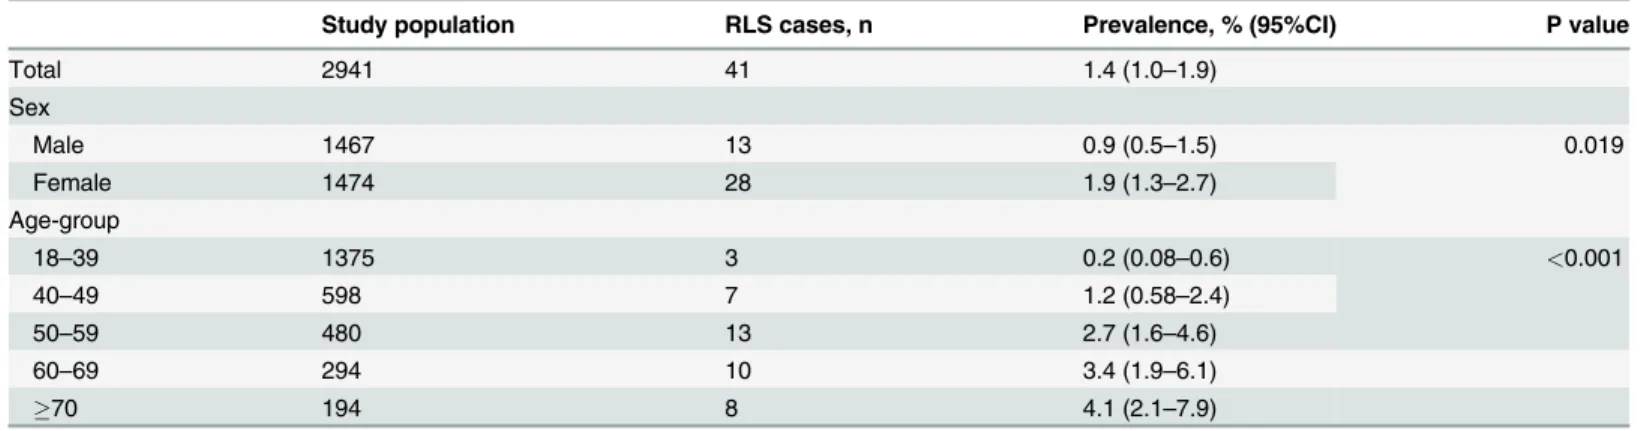 Table 1. Prevalence of RLS by sex and age-group.